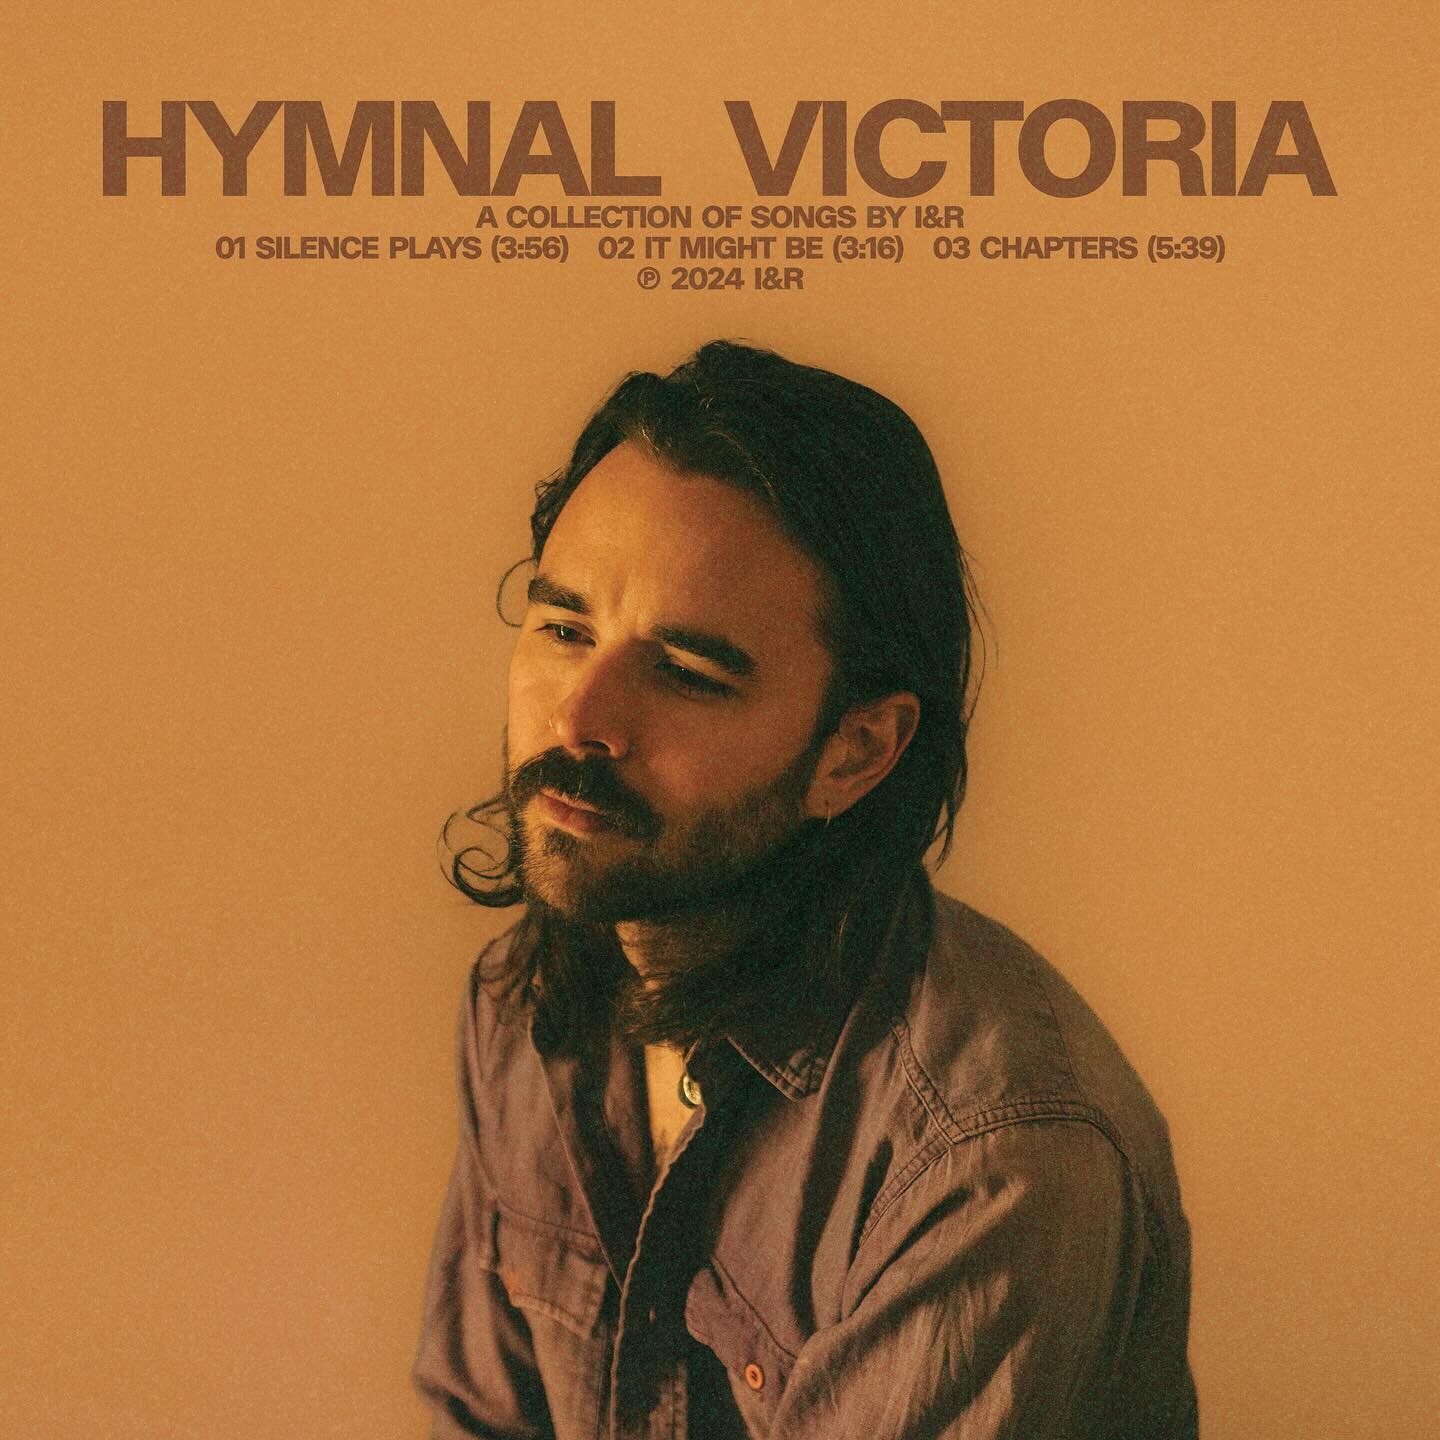 Hymnal Victoria, the third release by I&amp;R, is now available everywhere you listen to music. The intention with these songs was to depart from the isolation of my last record - the rhythms, voices, and expertise of those nearest and dearest to me 